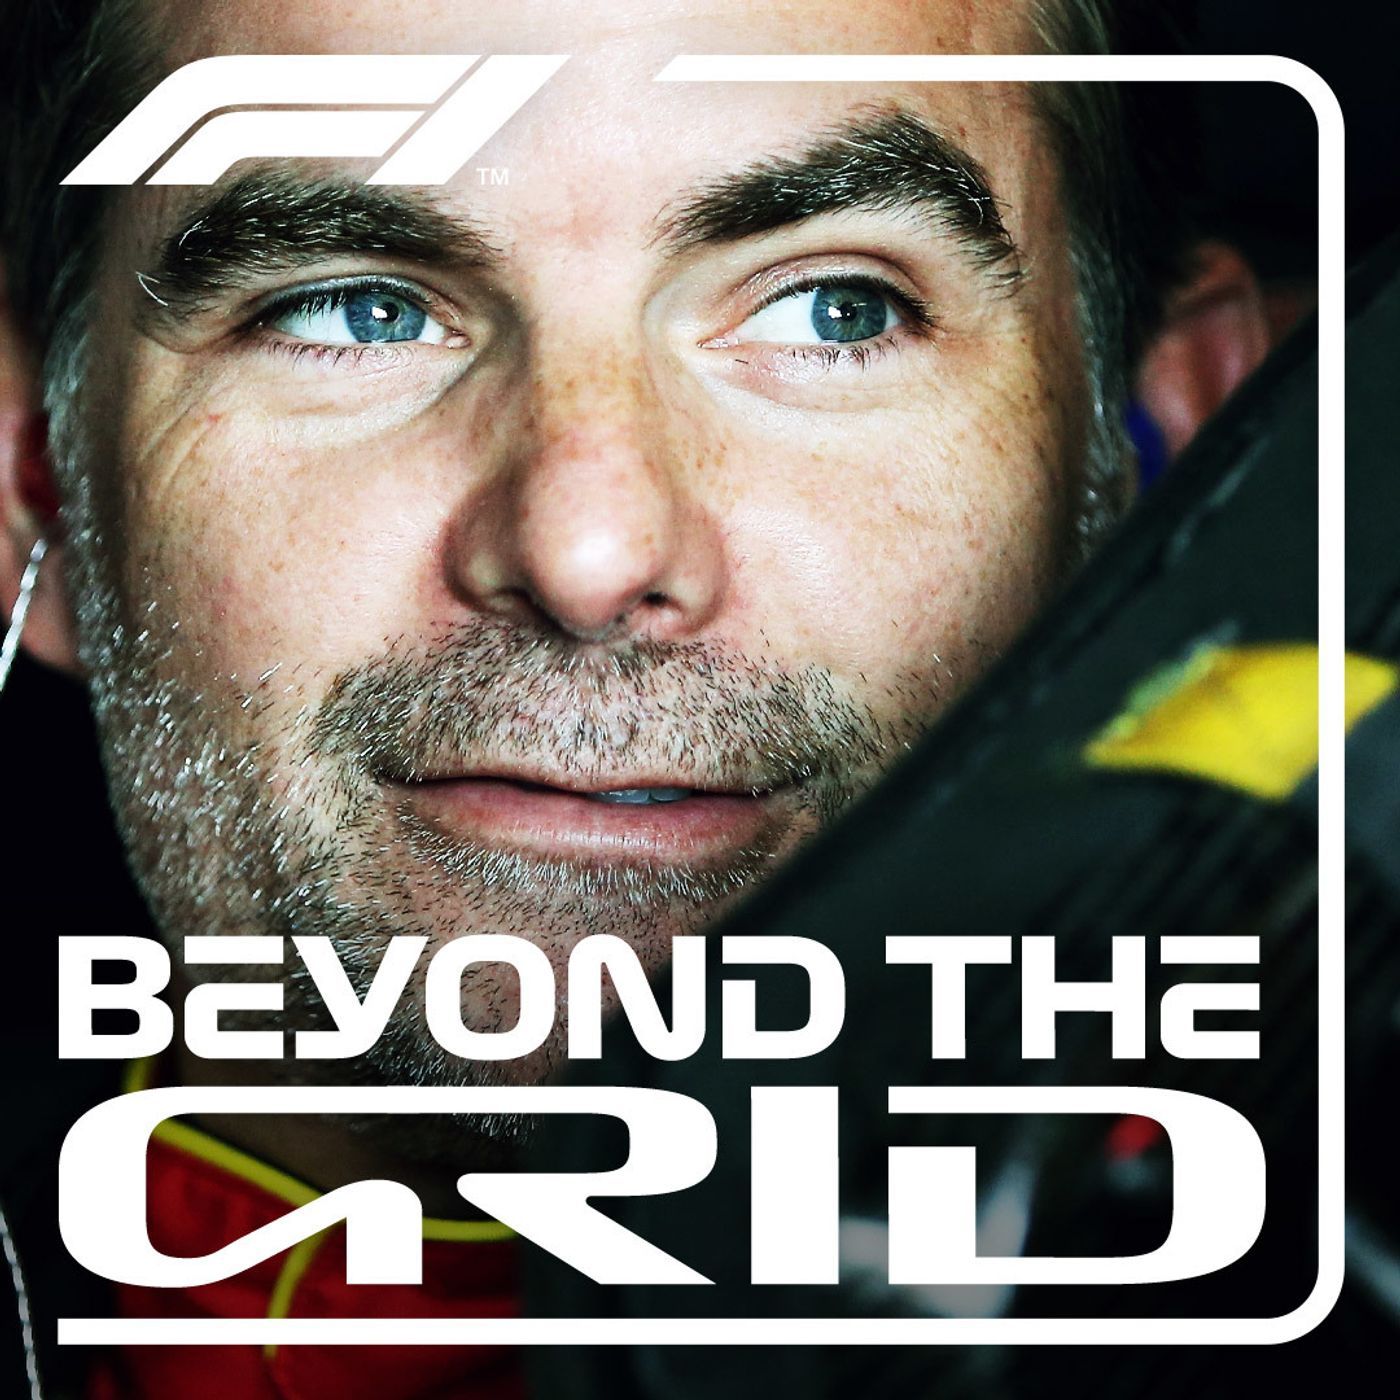 NASCAR icon Jeff Gordon on his famous F1 test and love of Grand Prix racing